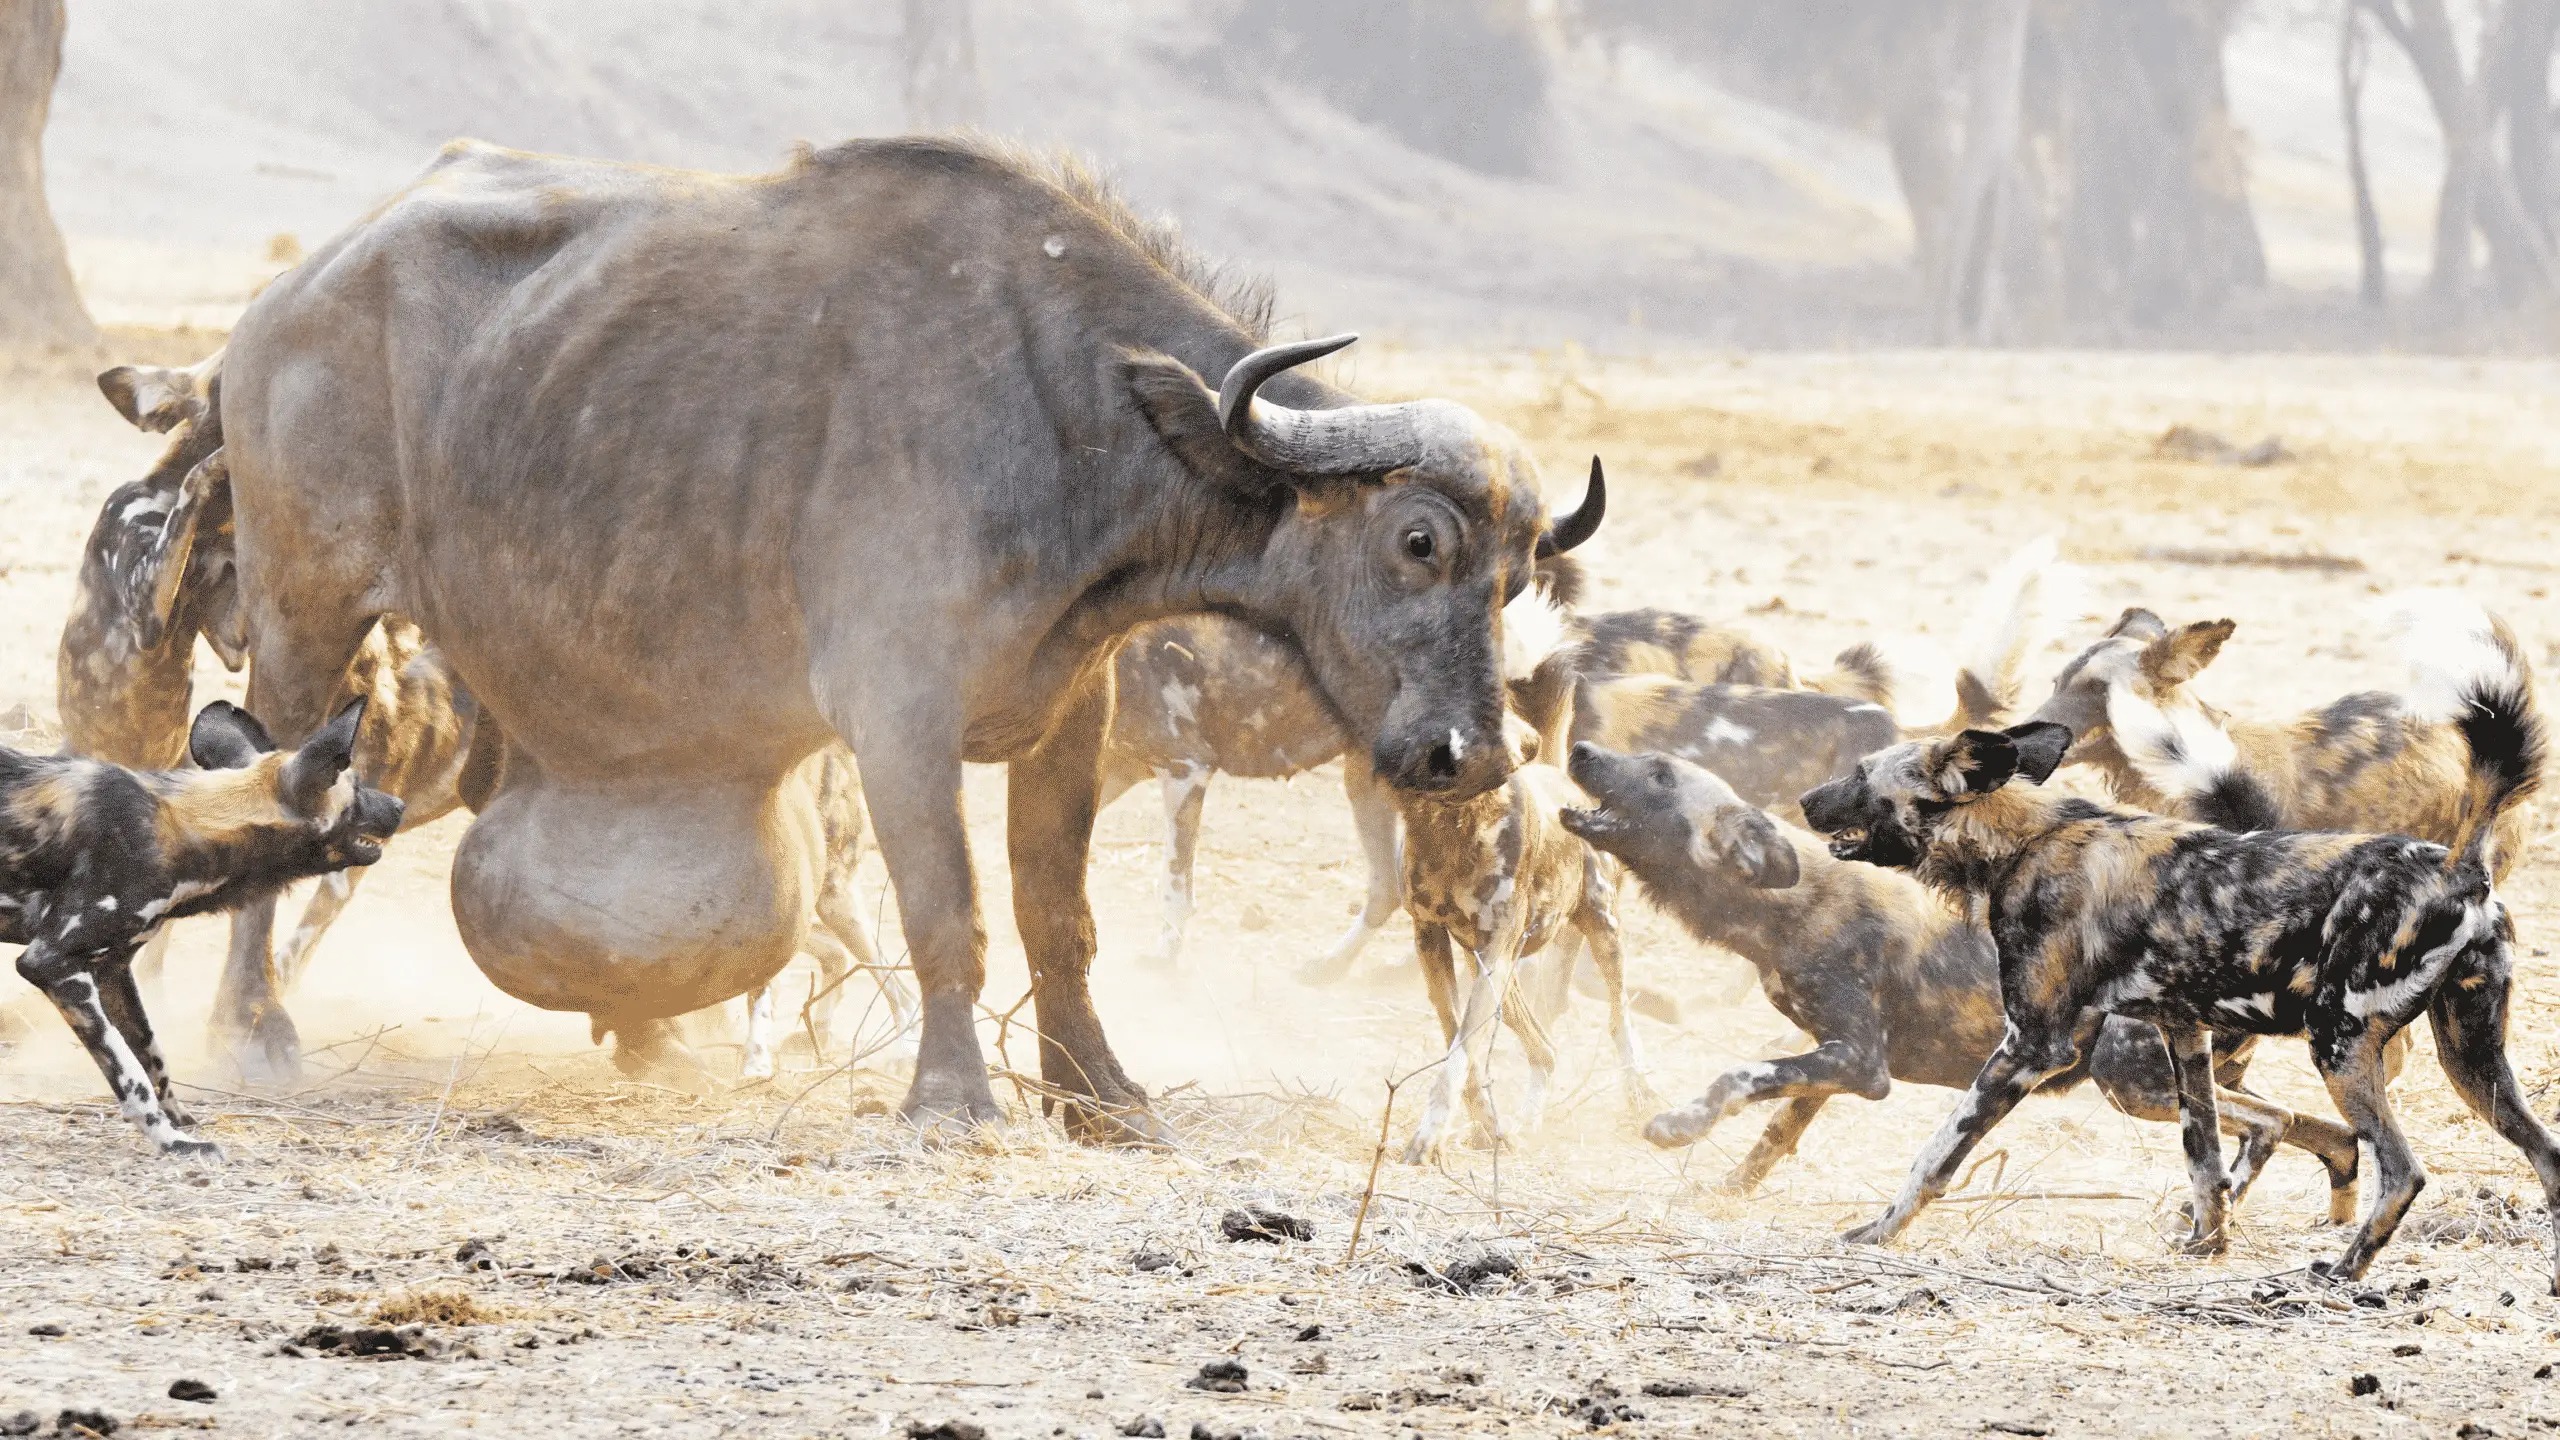 Jackals Risk Attack on Wild Buffalo's Giant Tumor and Genital for Food